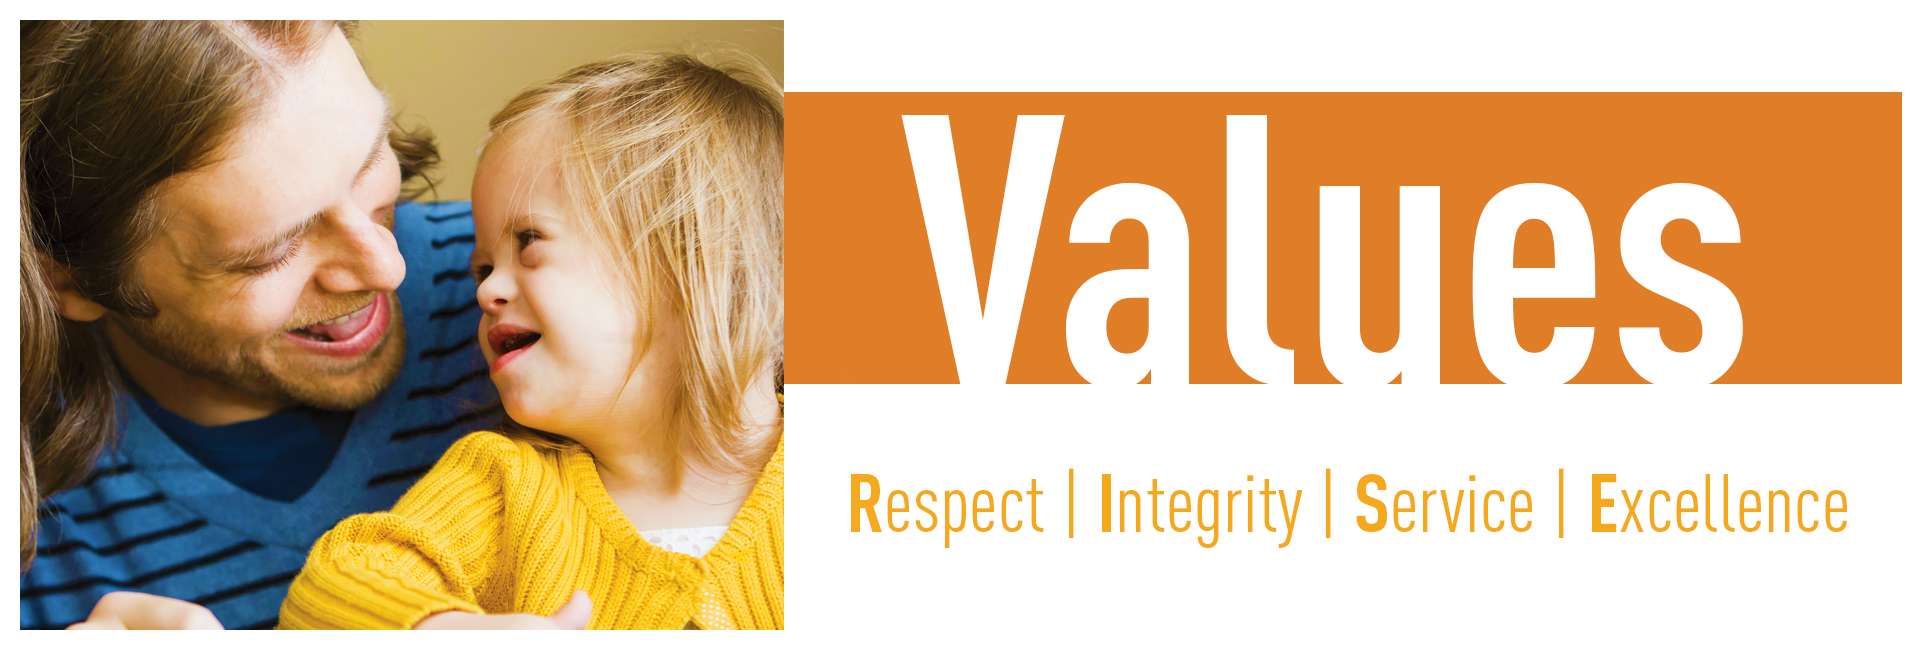 Values: Respect, Integrity, Service, Excellence